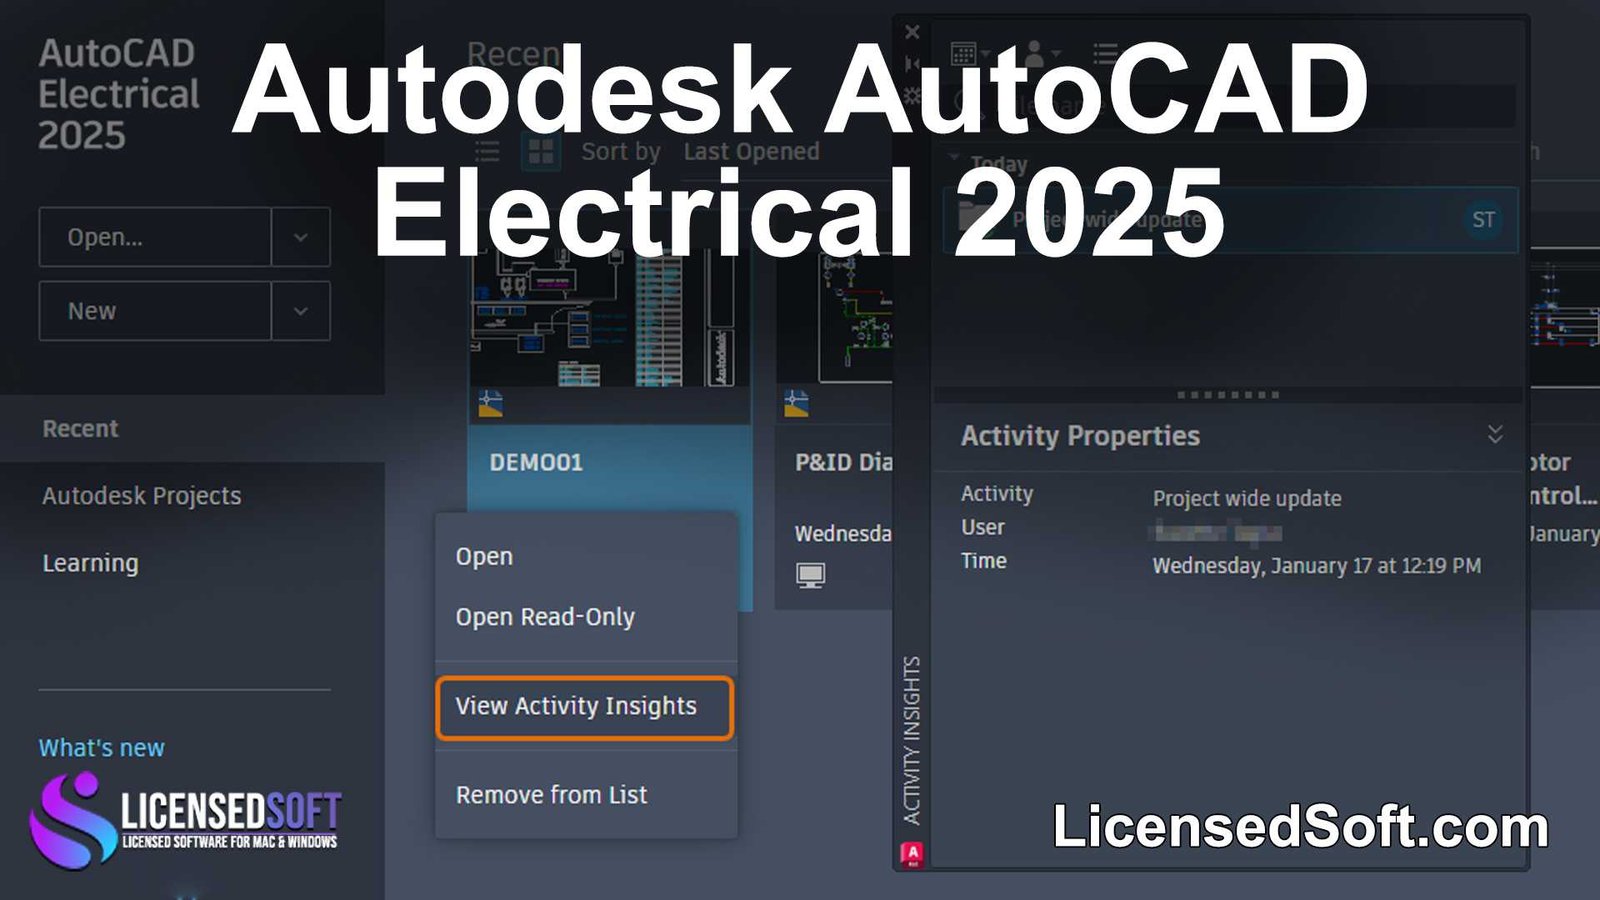 Autodesk AutoCAD Electrical 2025 By LicensedSoft